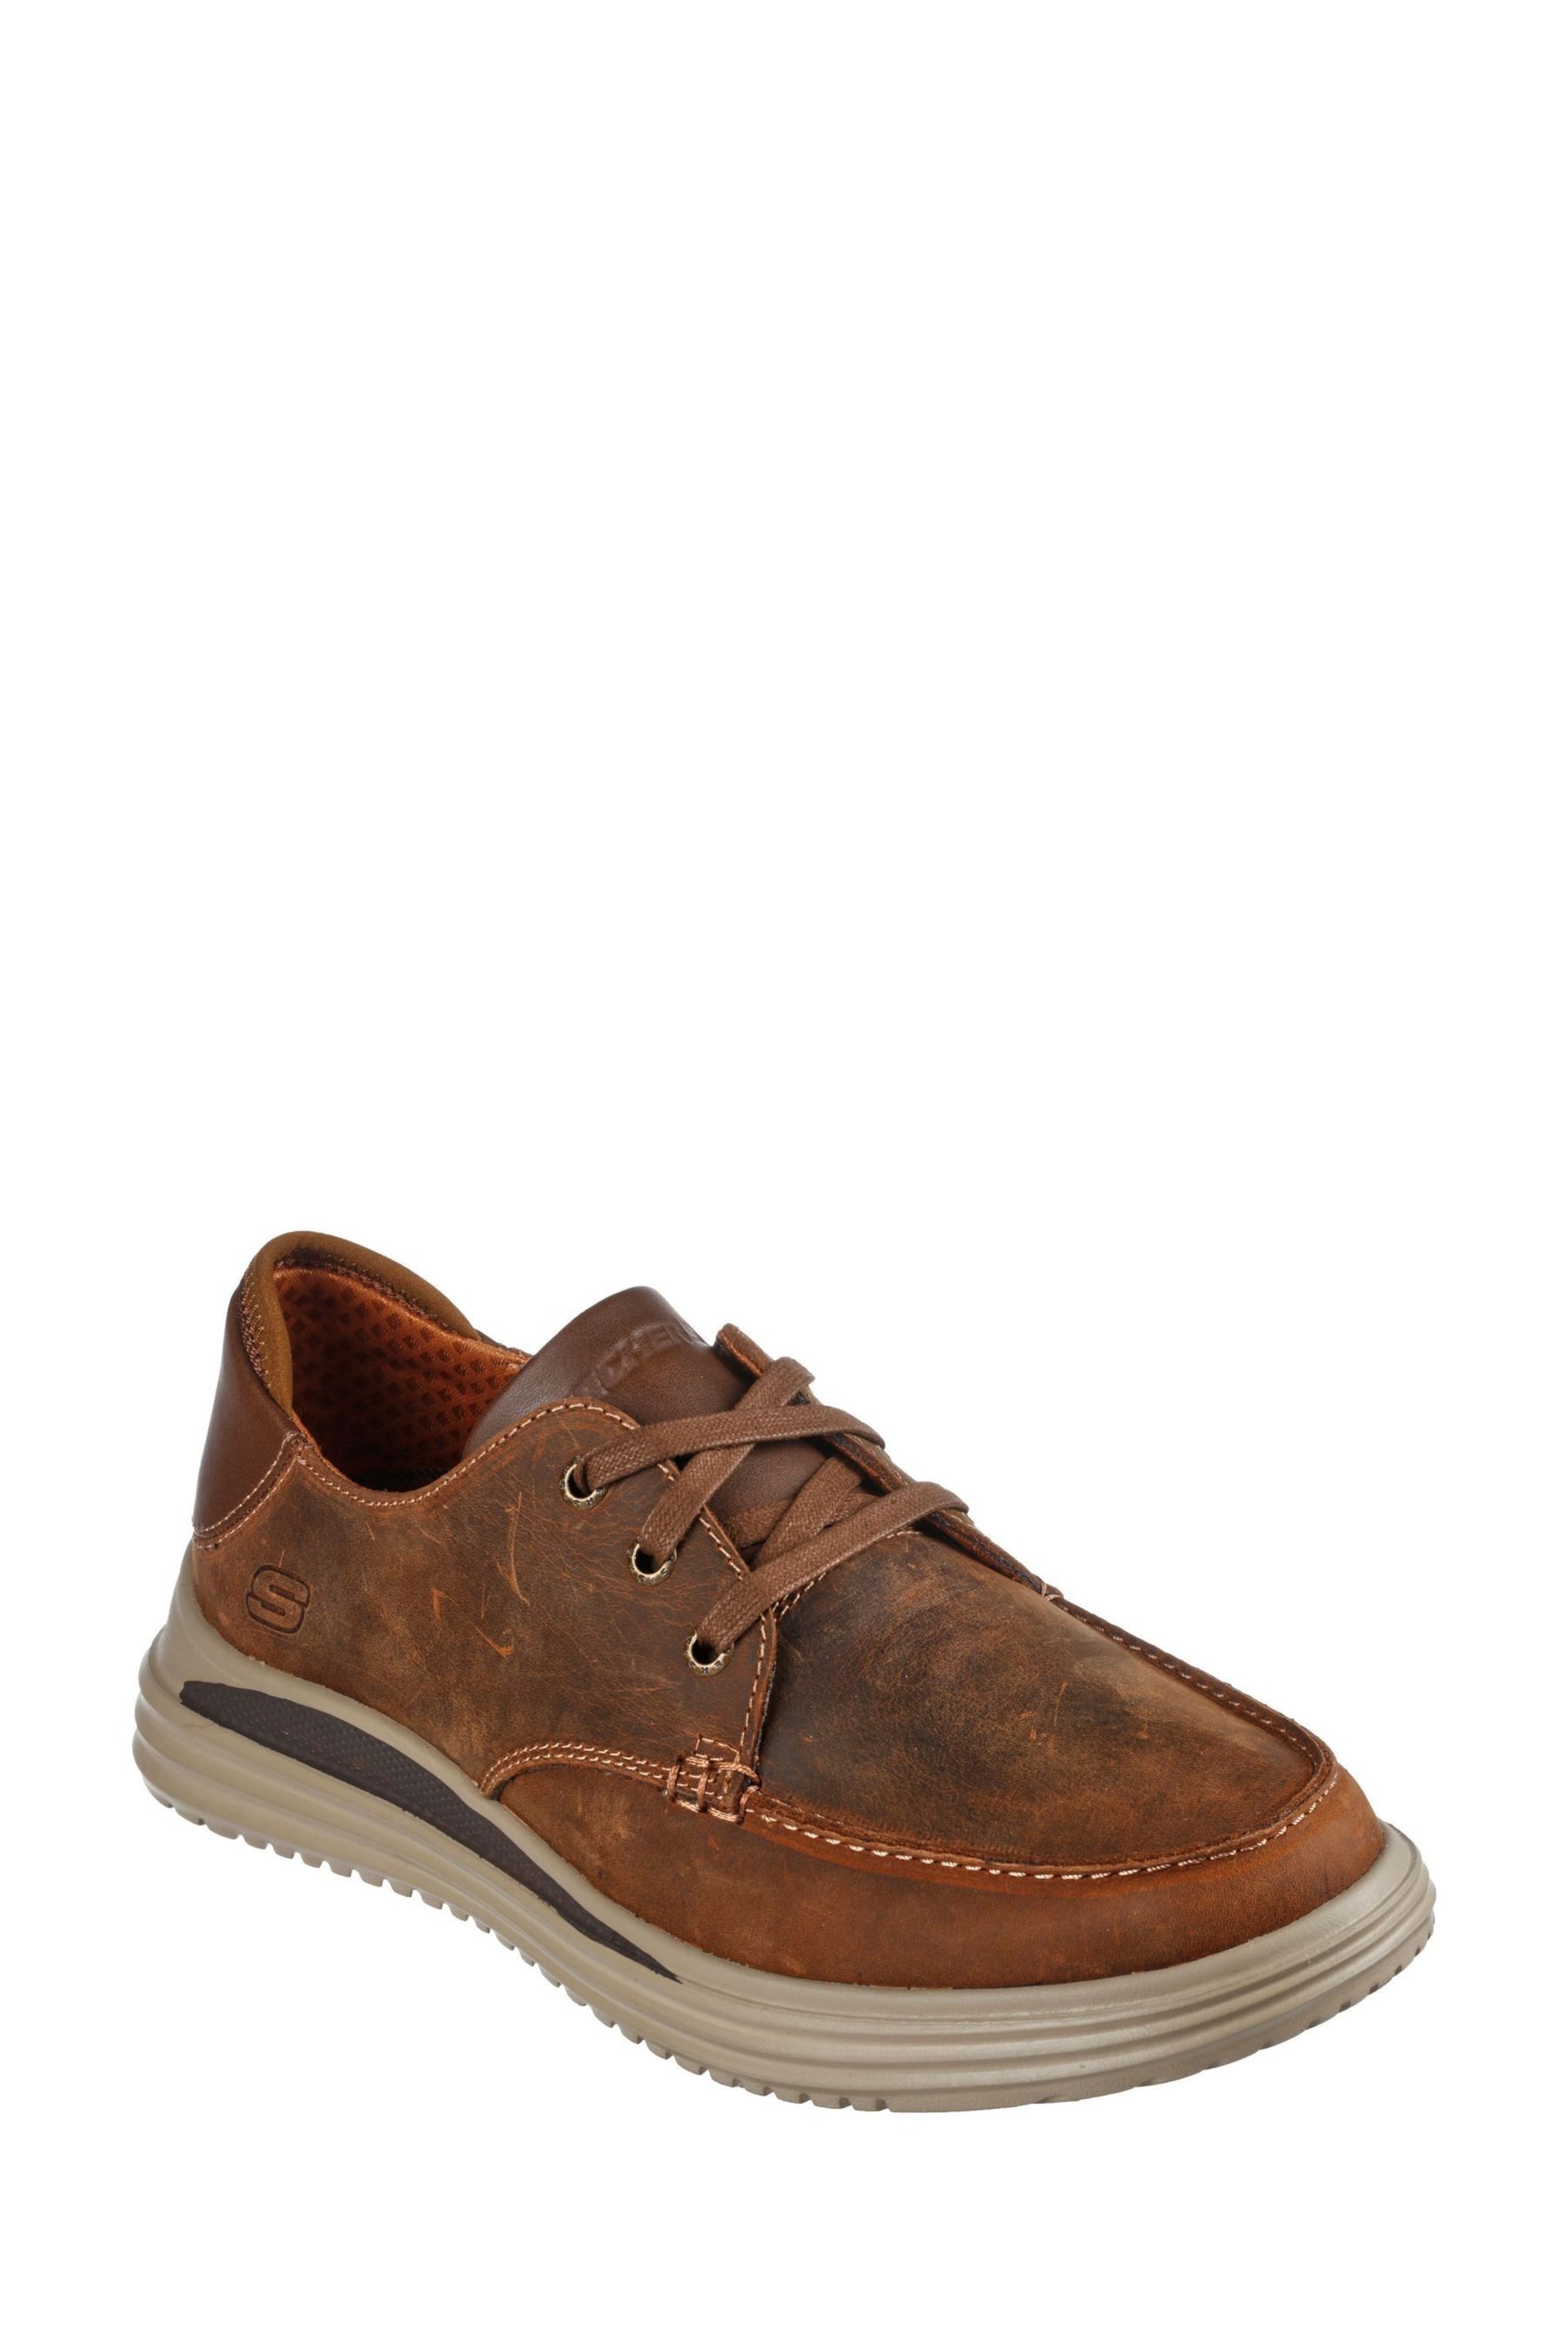 Skechers Brown Proven Valargo Mens Shoes - Image 3 of 5